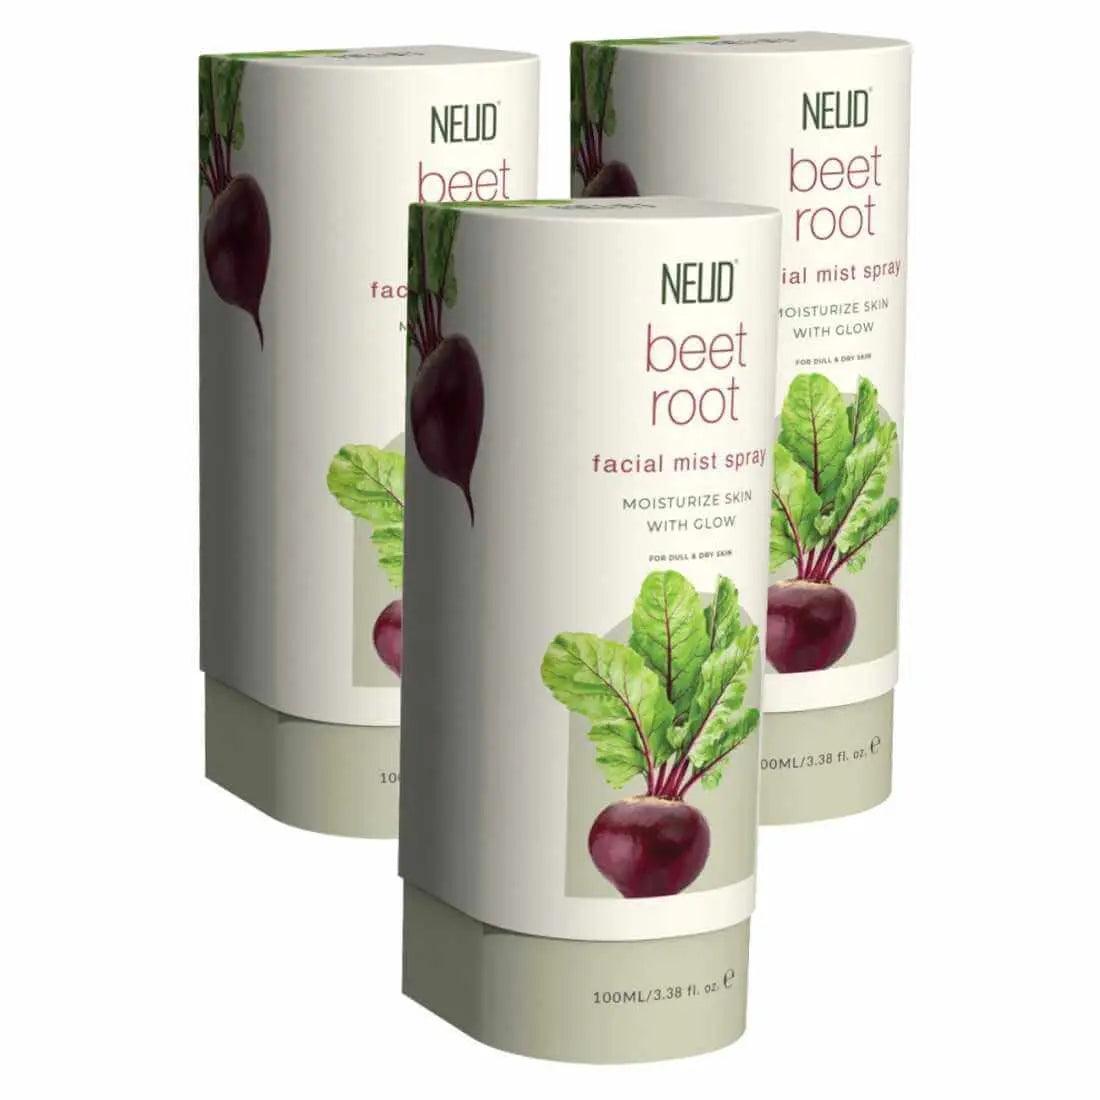 NEUD Beet Root Facial Mist Spray For Dull and Dry Skin - 100 ml 9559682313348